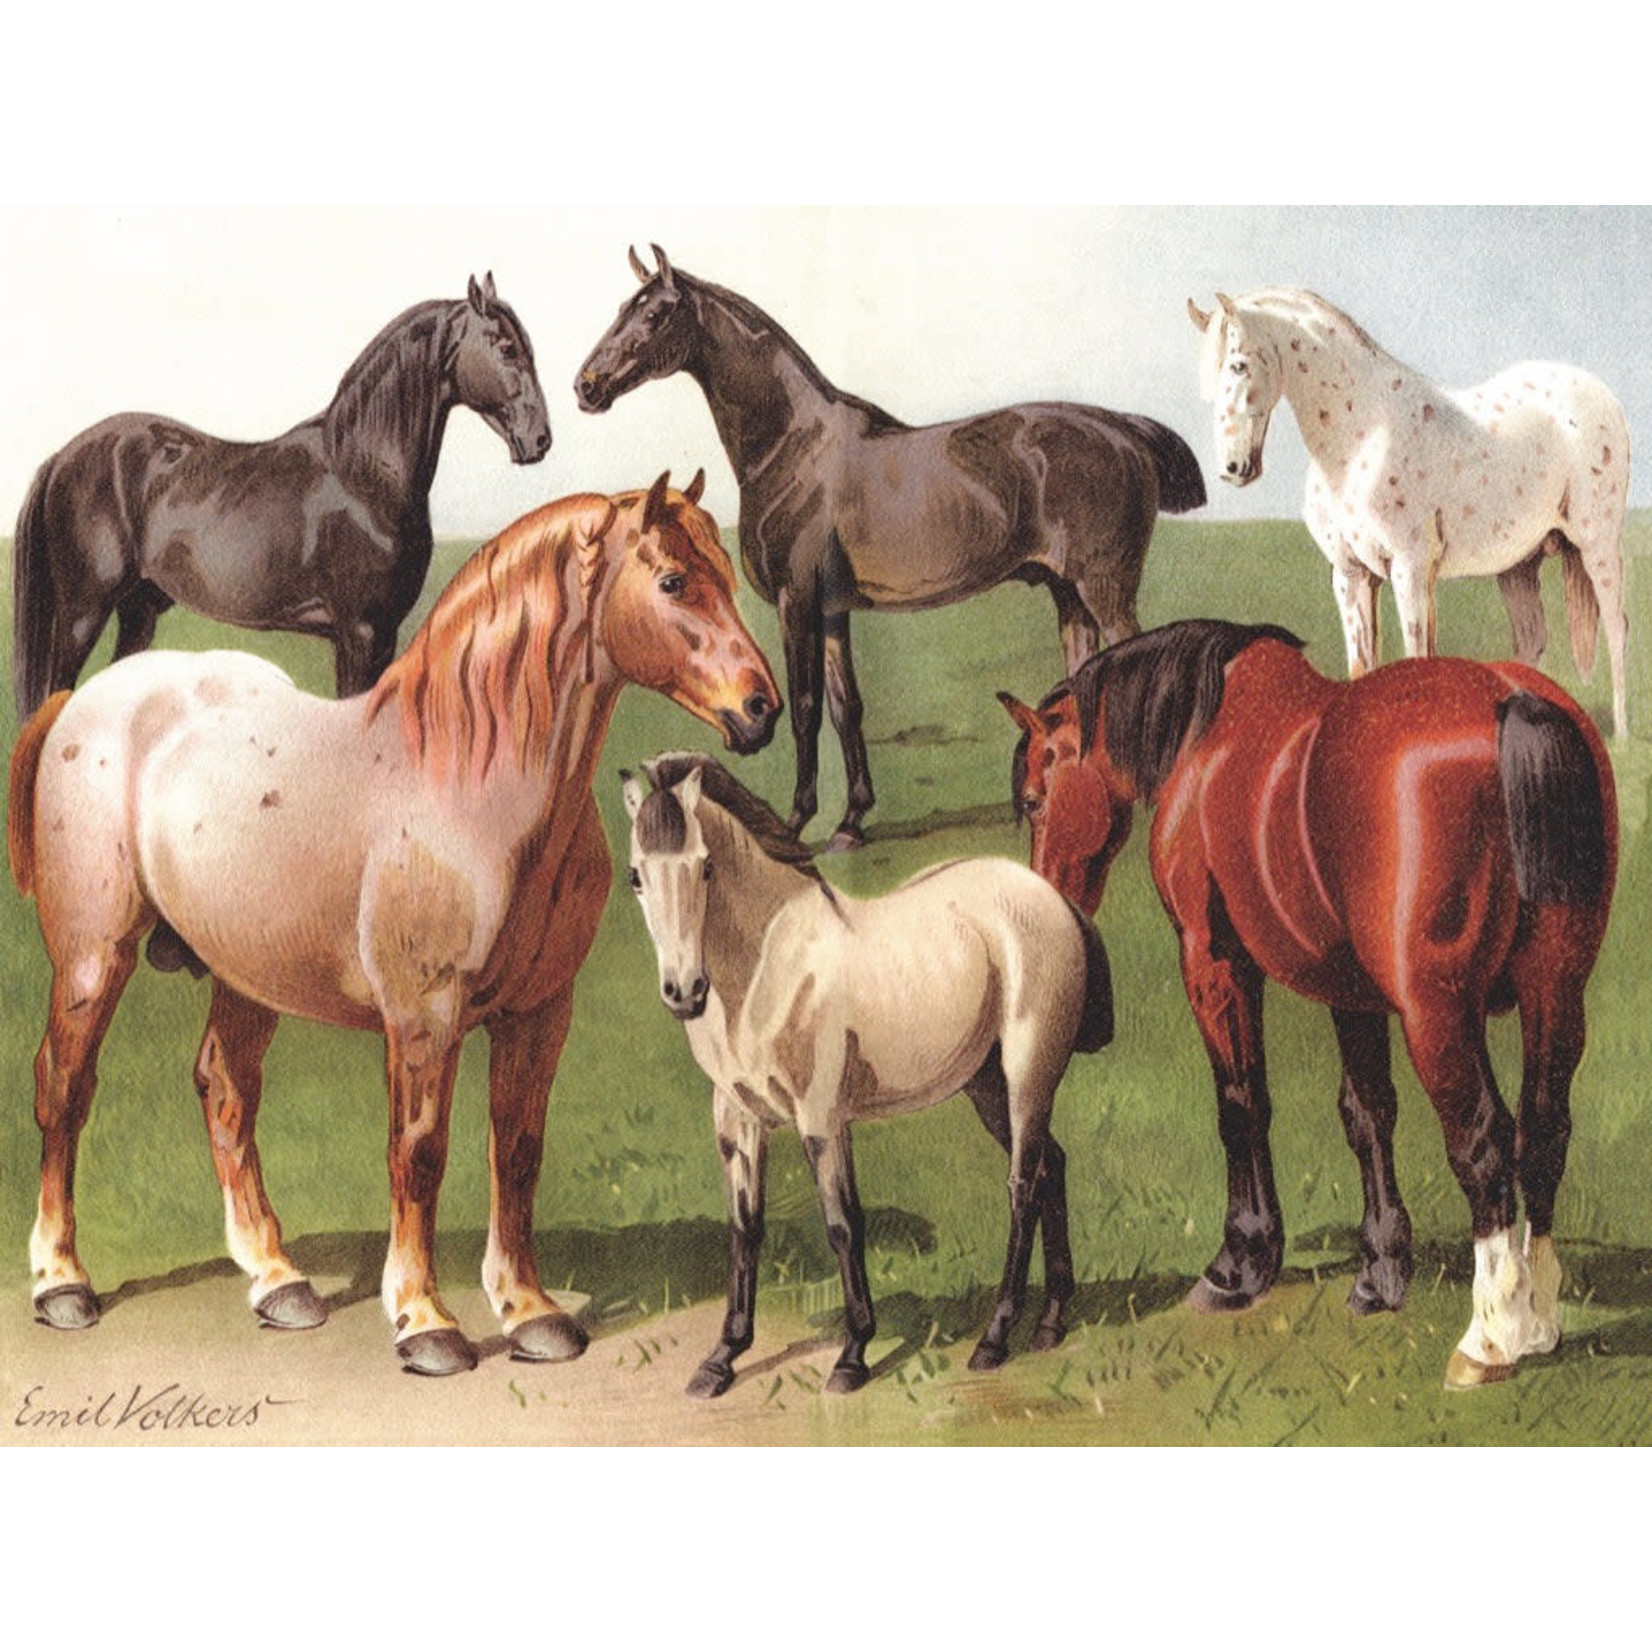 New York Puzzle Co Vintage Collection - Horse Breeds 1000 Piece Puzzle